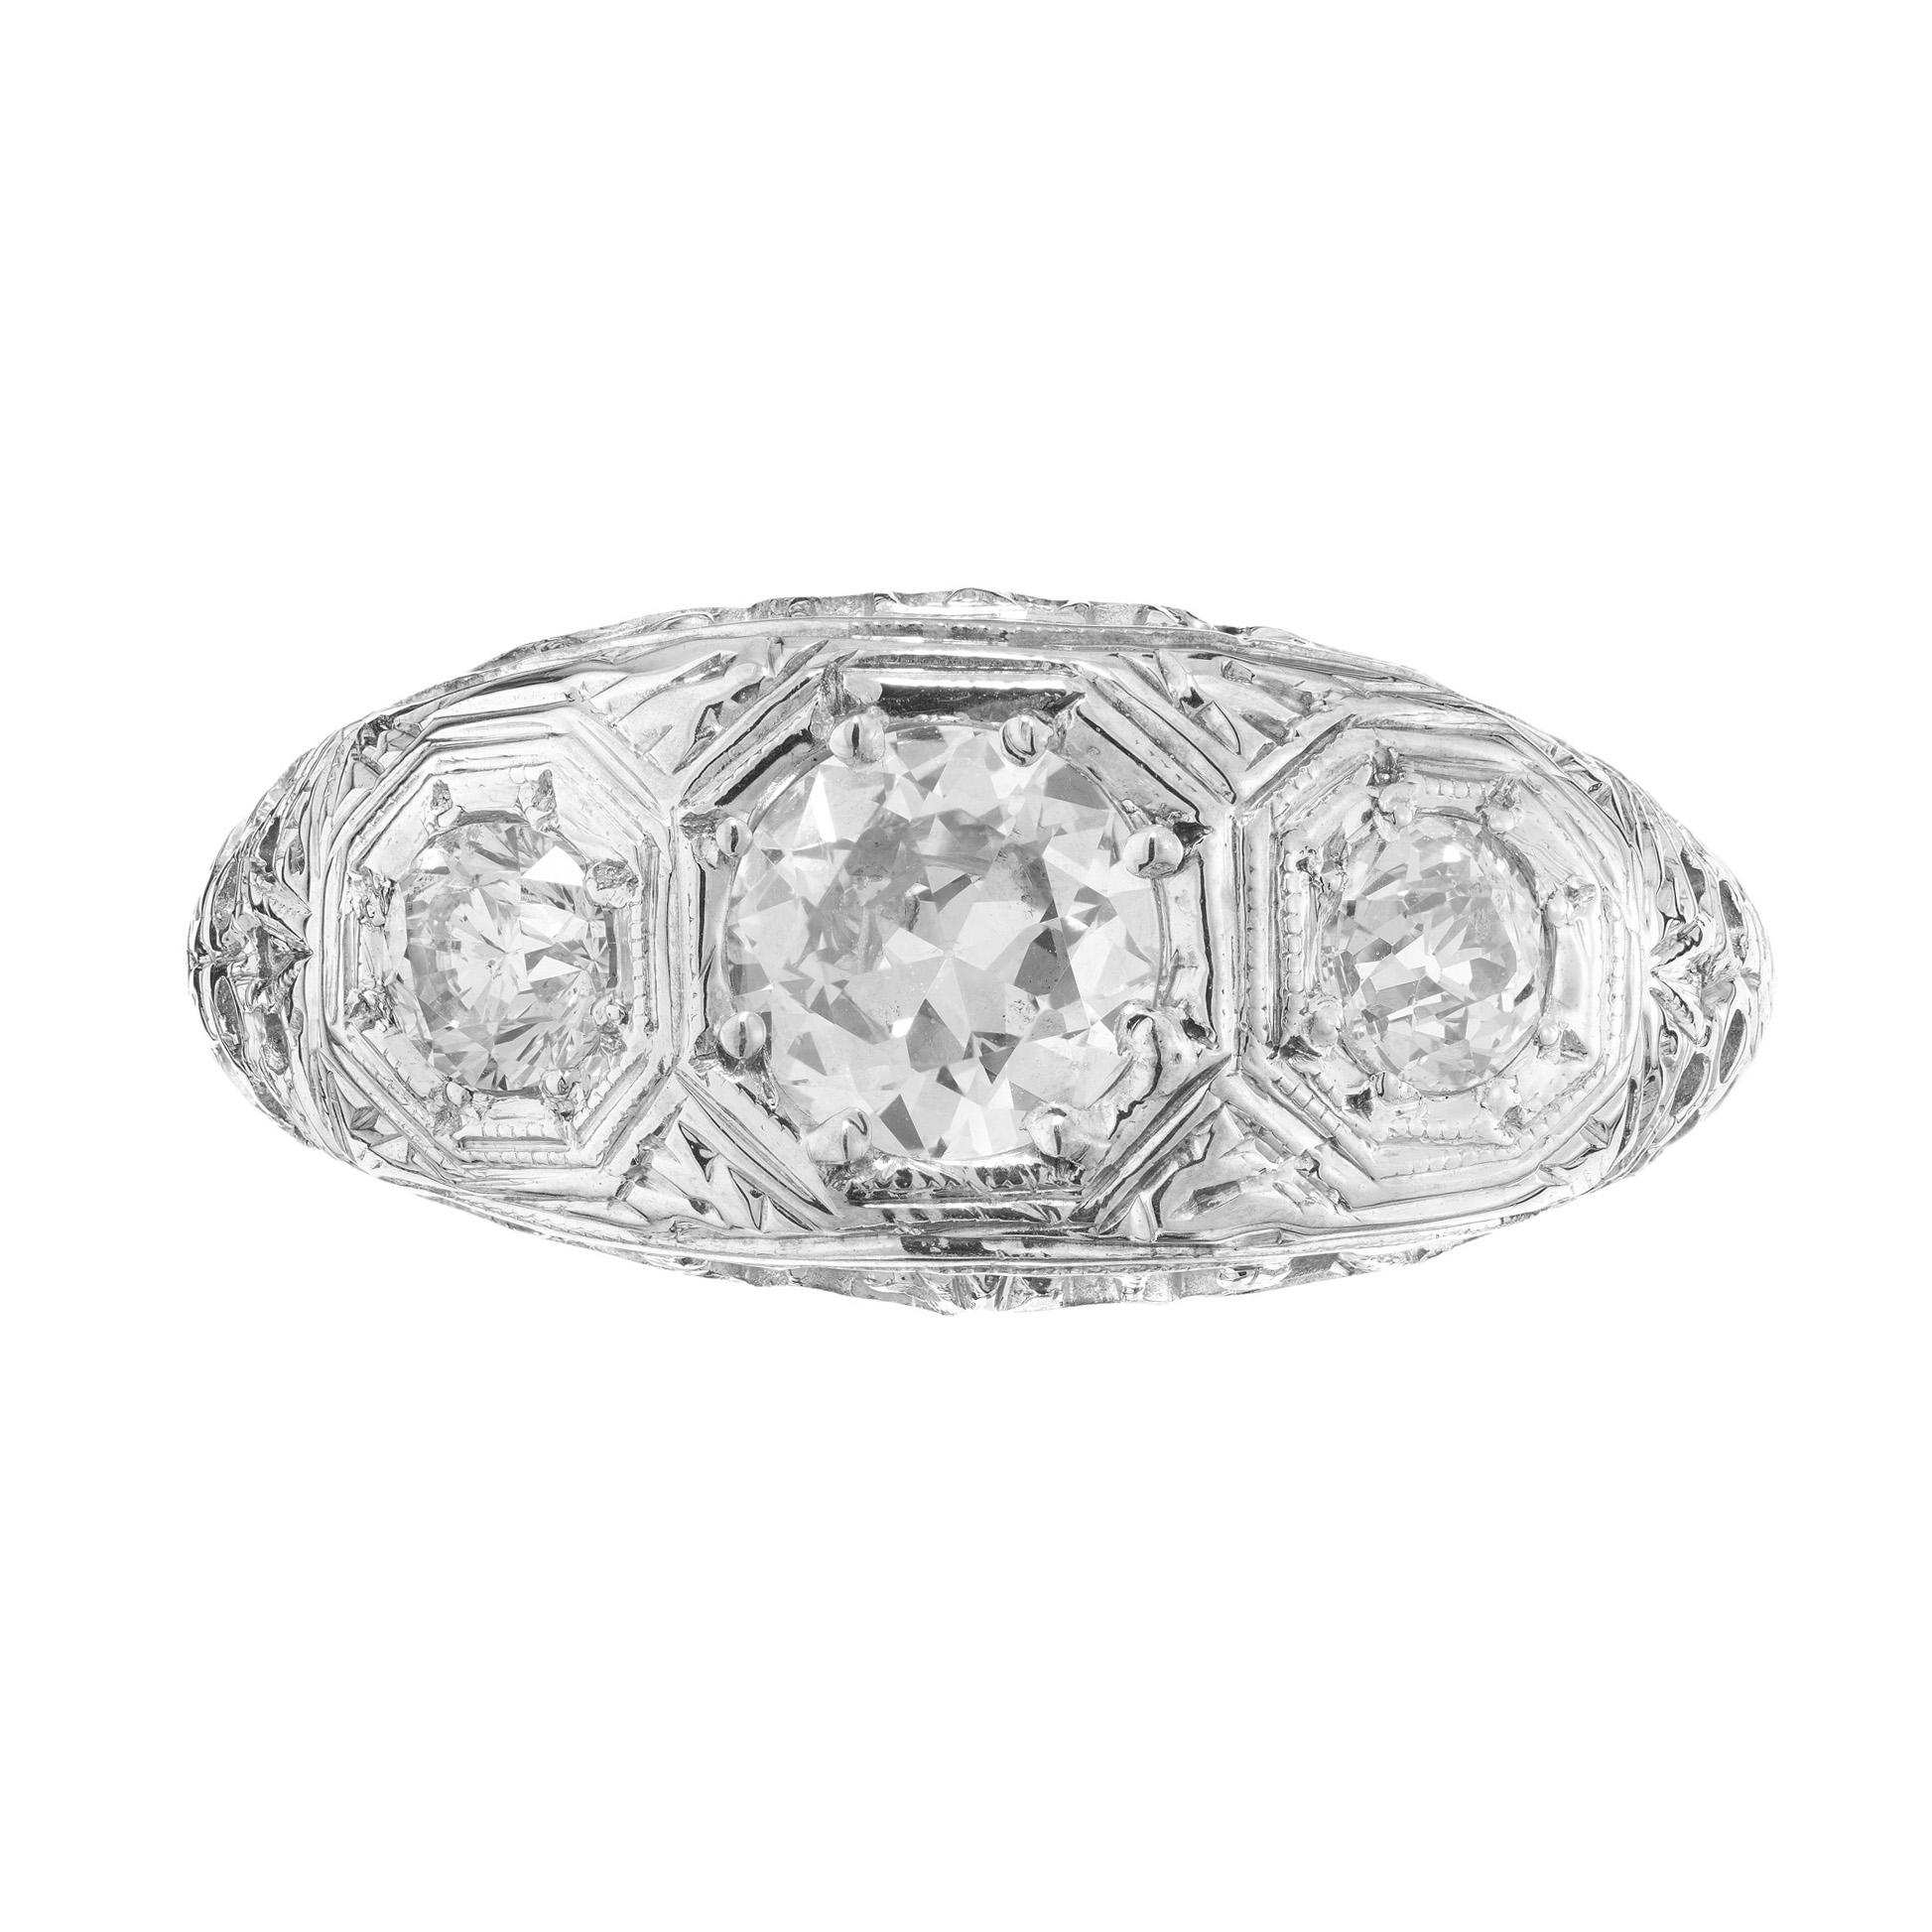 Wonderful 1930's Art Deco diamond domed engagement ring. This three-stone ring begins with a .52ct old European brilliant cut diamond center stone. Accented by 2 old European cut side diamonds. All three are set in a filigree engagement setting made